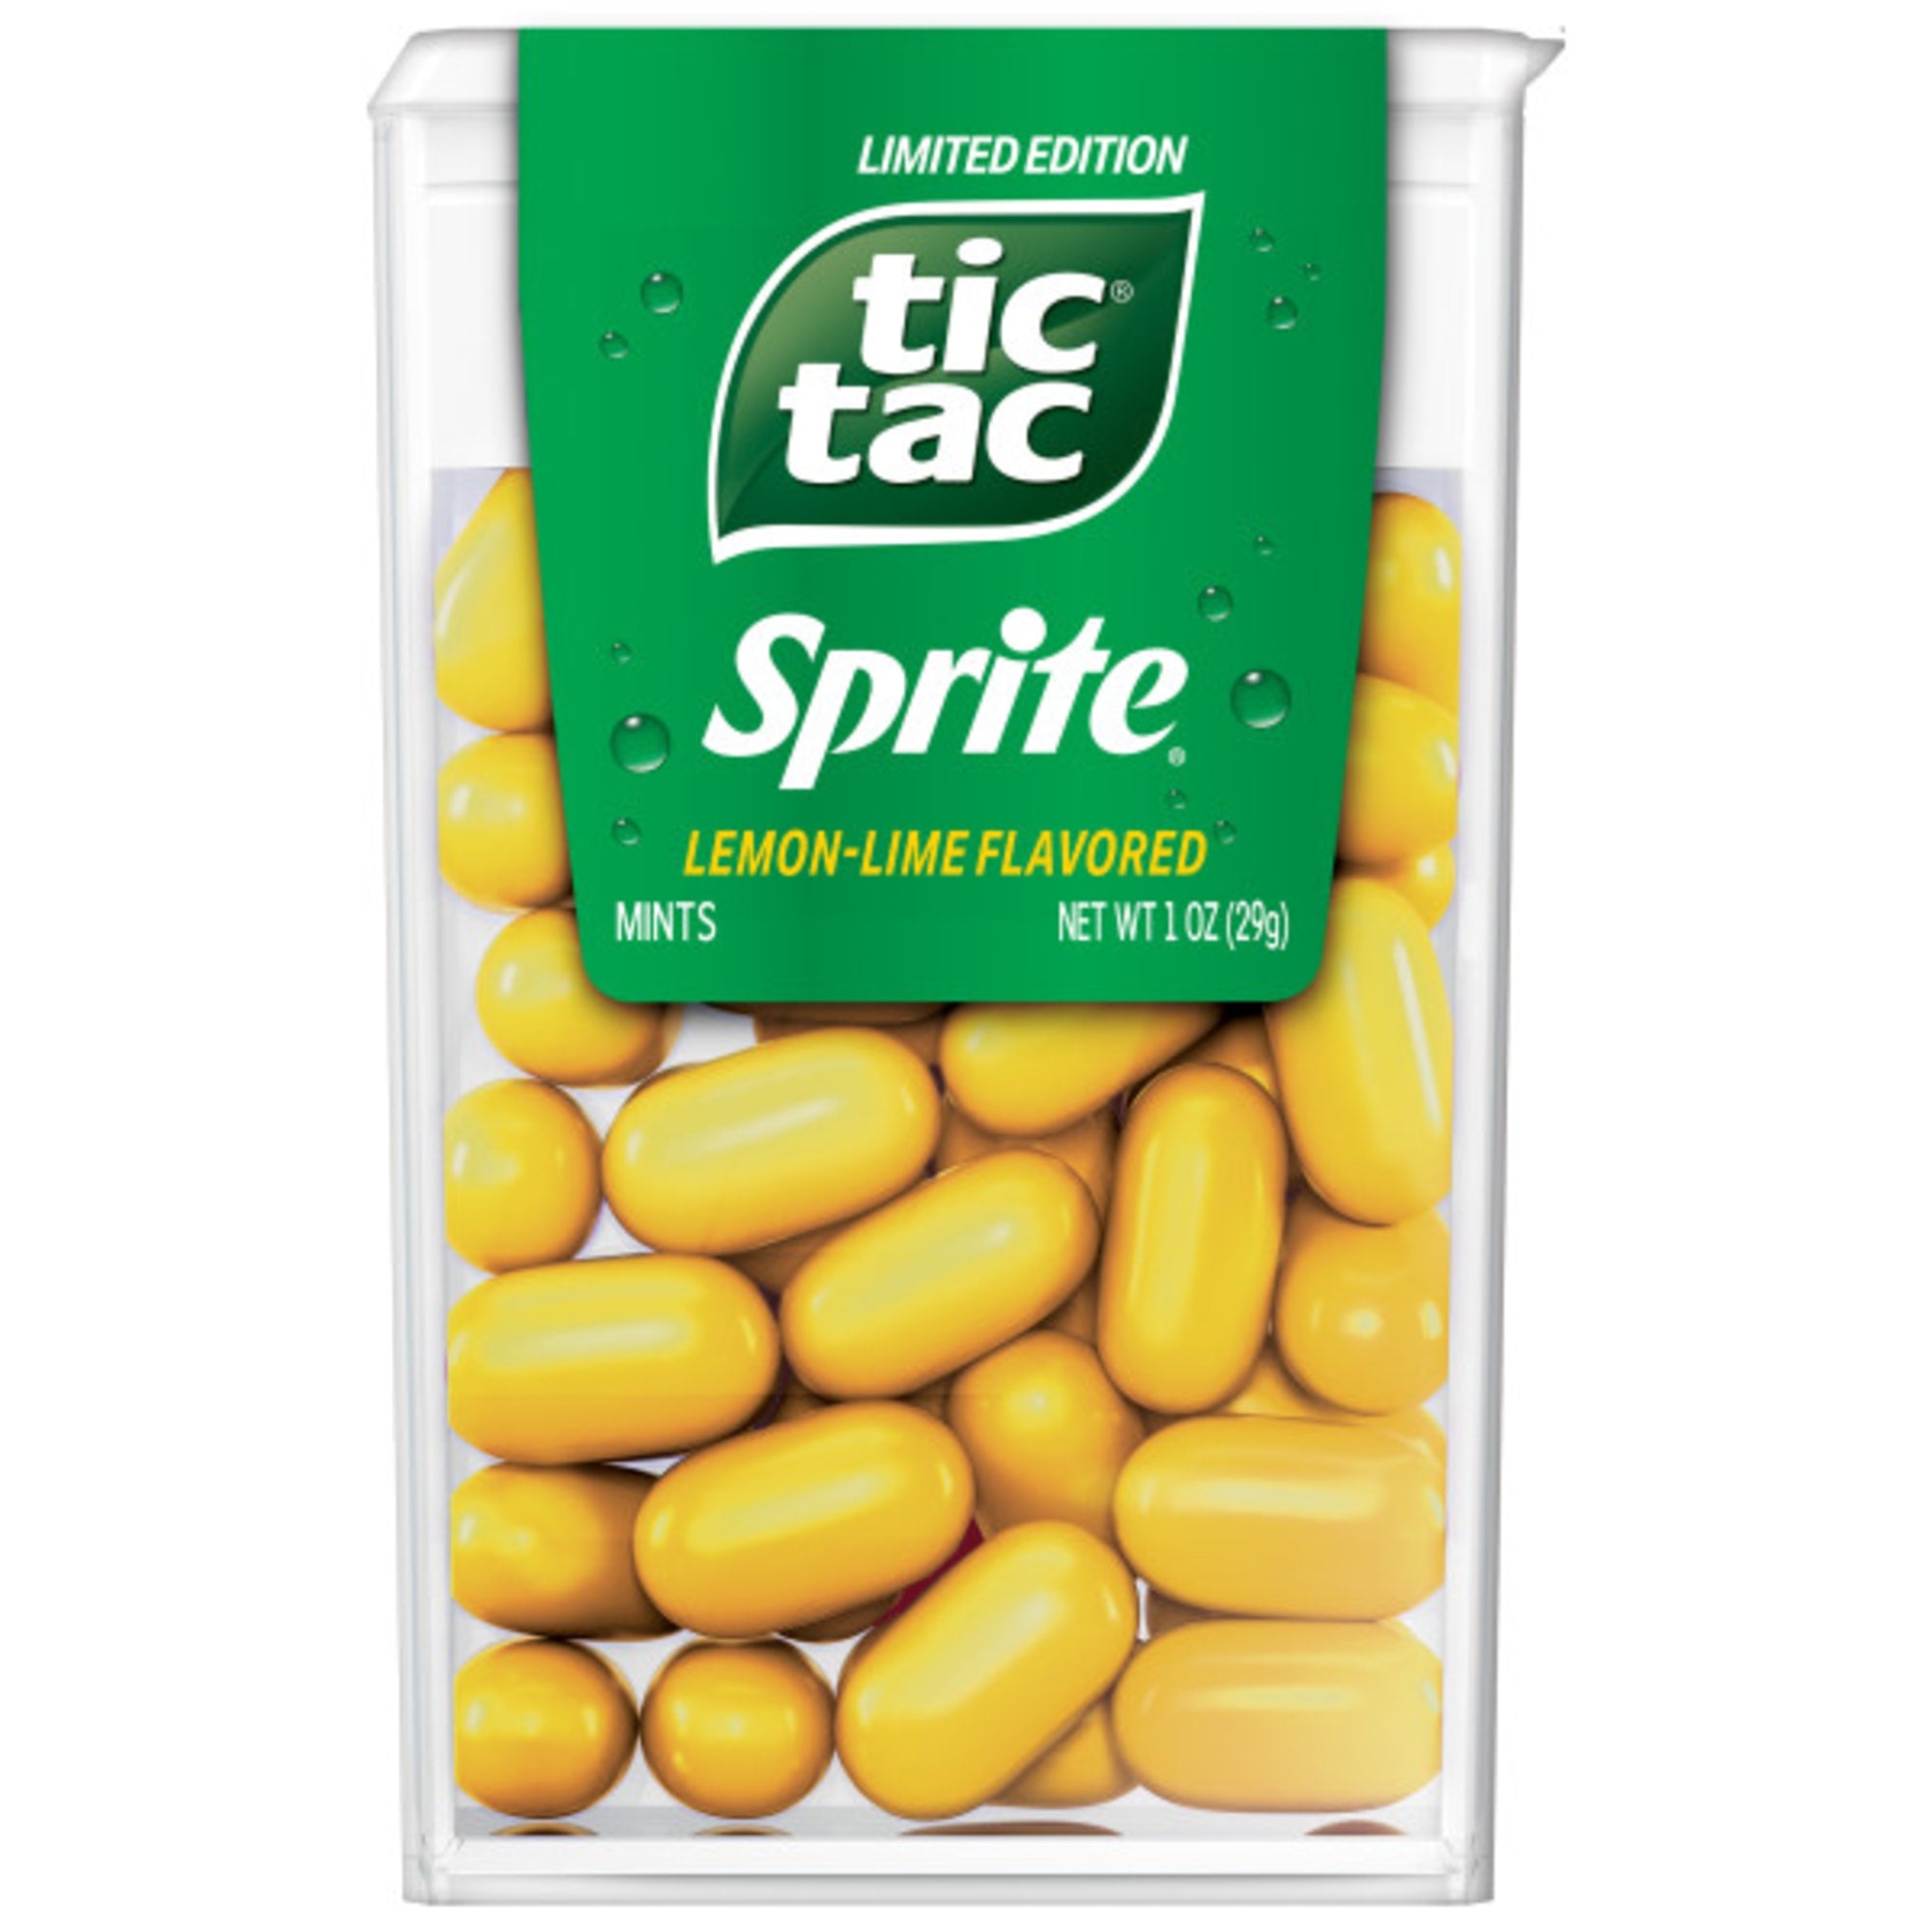 Tic Tac Sprite (Limited Edition) (18g)